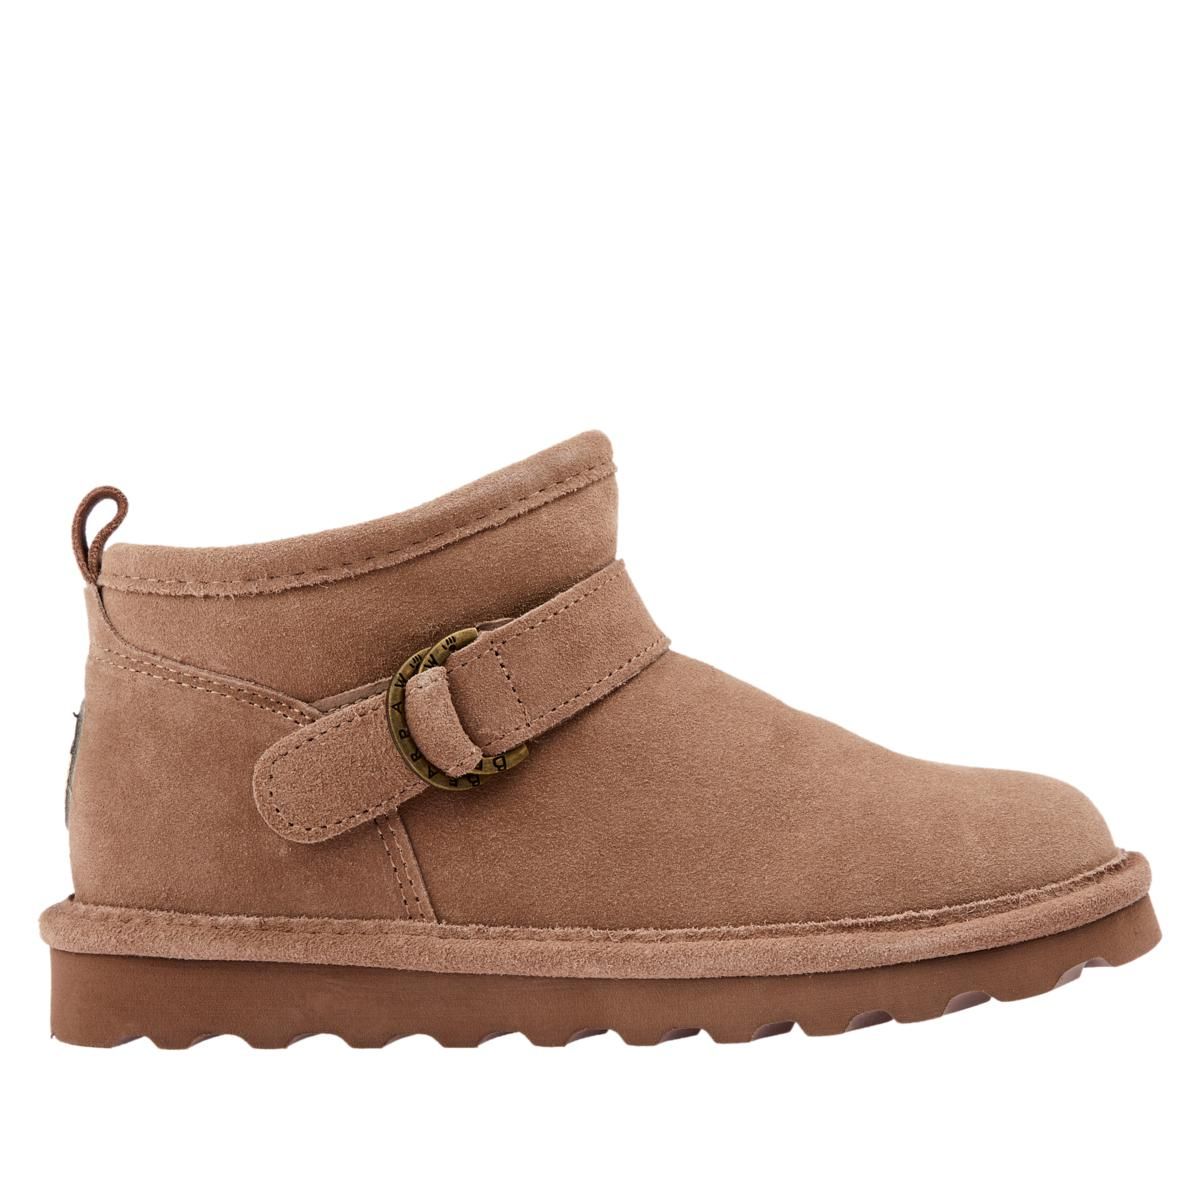 BEARPAW Suede Micro Water- and Stain-Repellent Boot | HSN